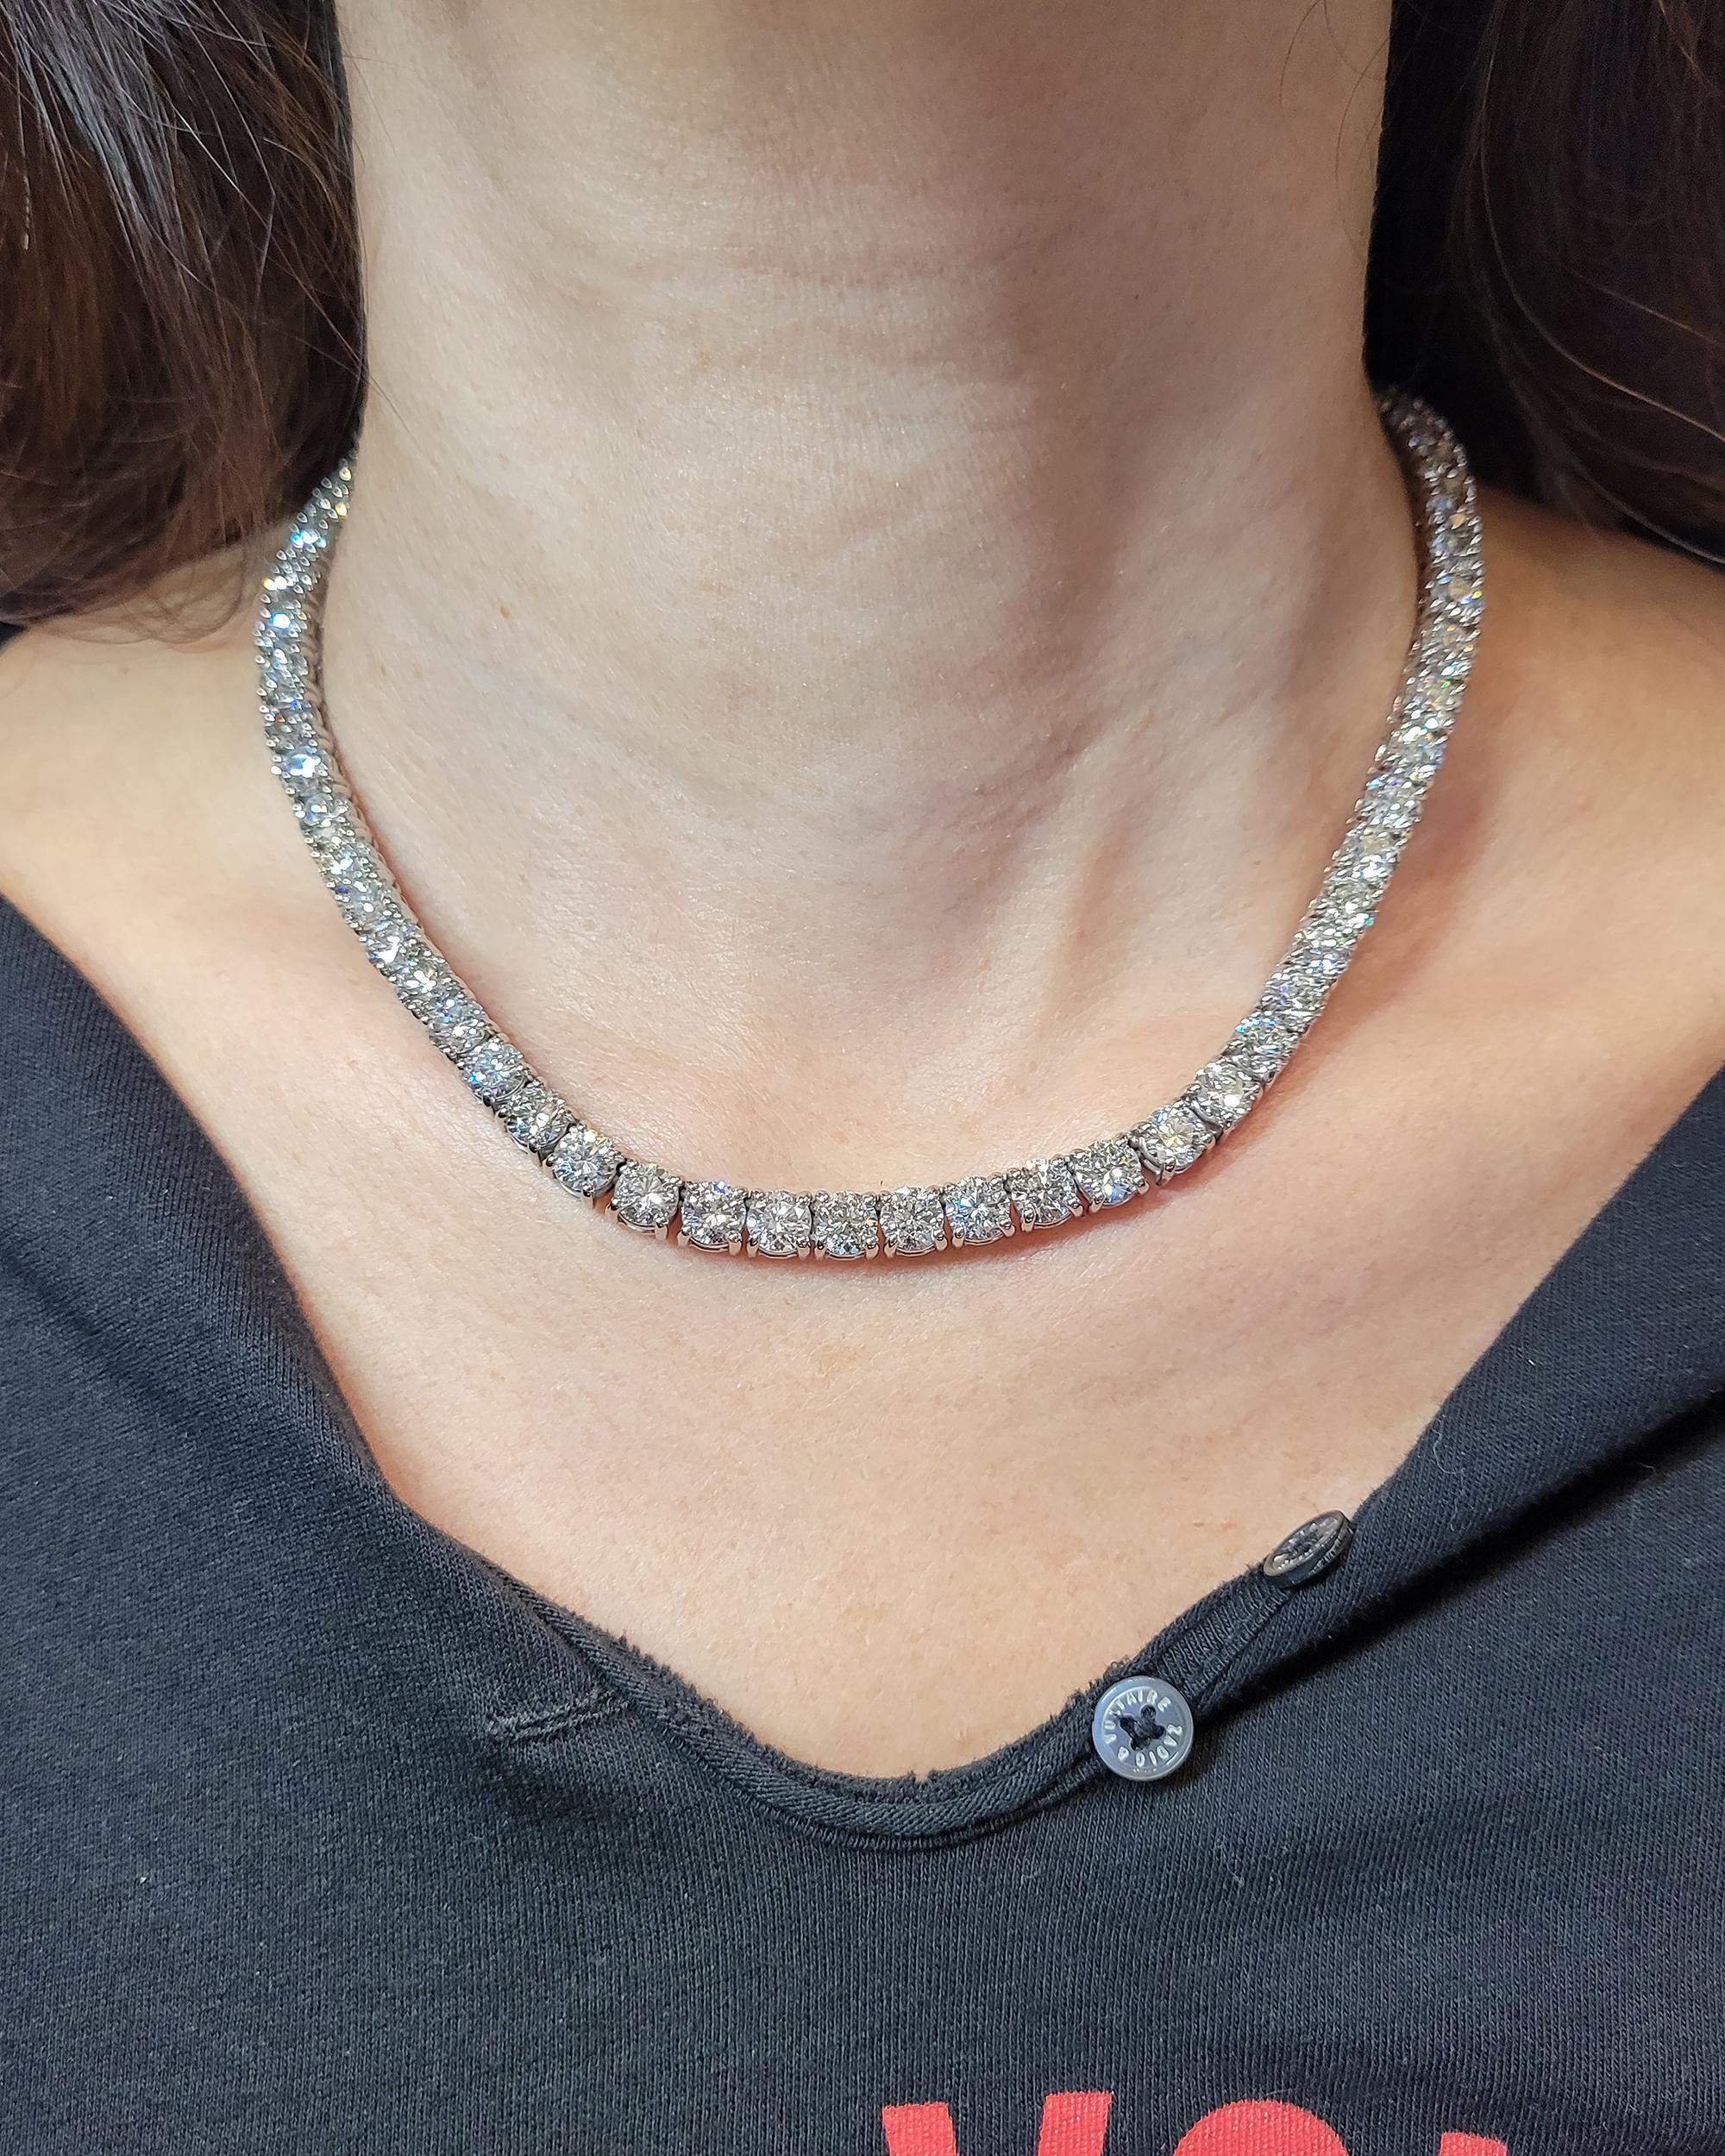 A beautiful tennis necklace comprising of 68 round diamonds weighing a total of 47.60 carats, approximately 0.7 carat each. 
The diamonds are natural with H-I colors, VS-SI clarity. Not certified.
Metal is 14kt white gold, gross weight 54.96